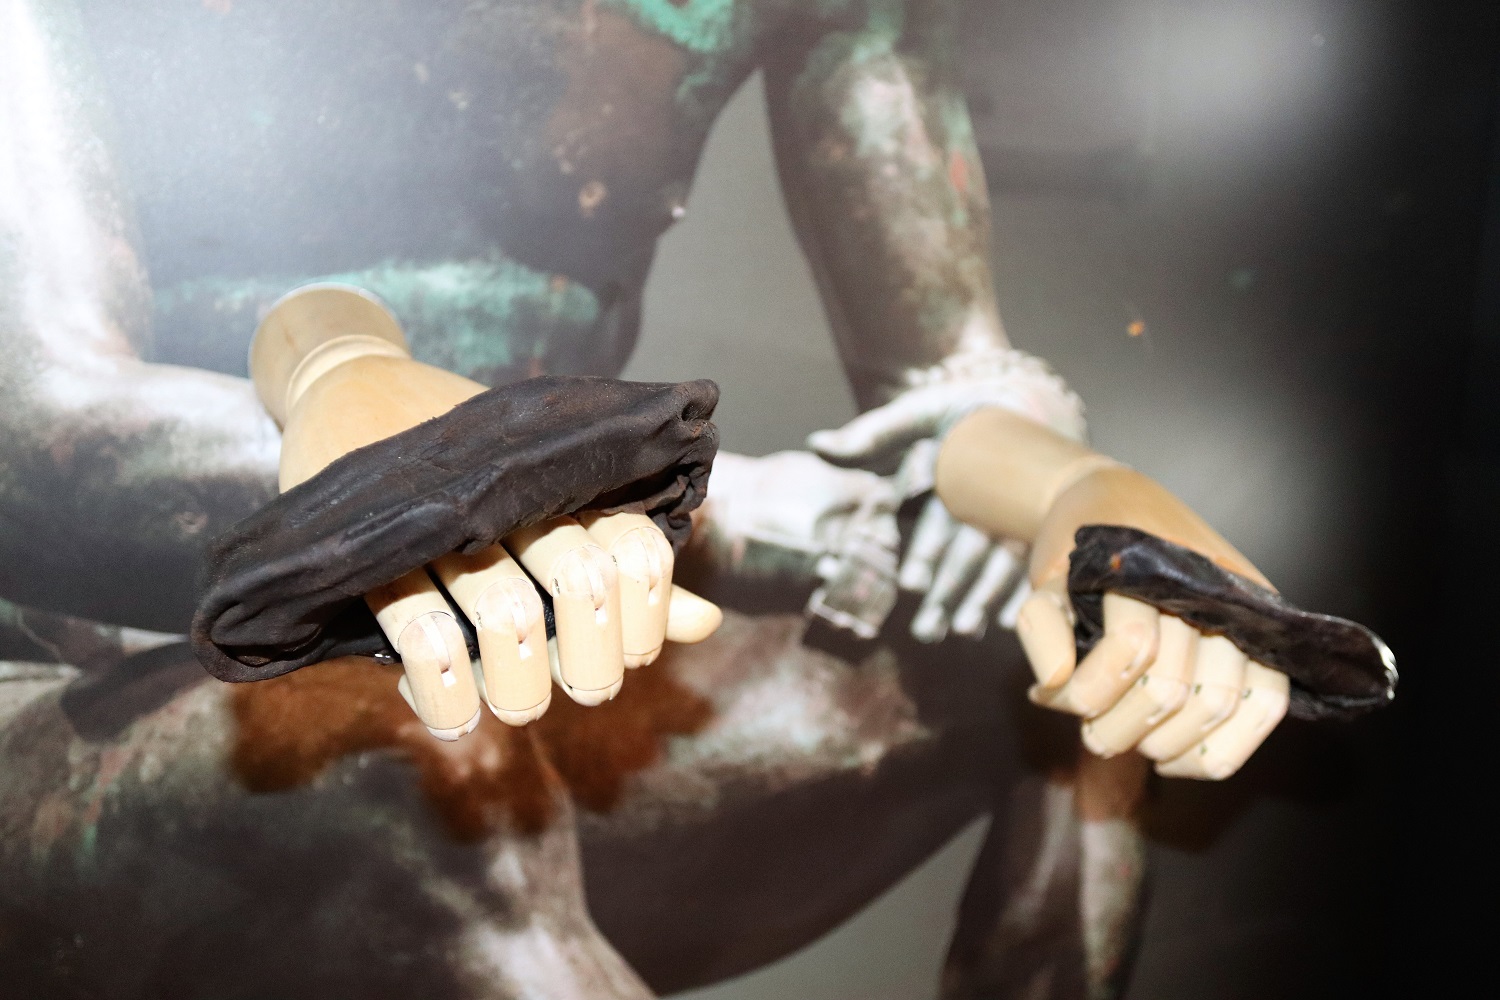 Roman20Boxing20Gloves20on20Hands20Small1.jpg